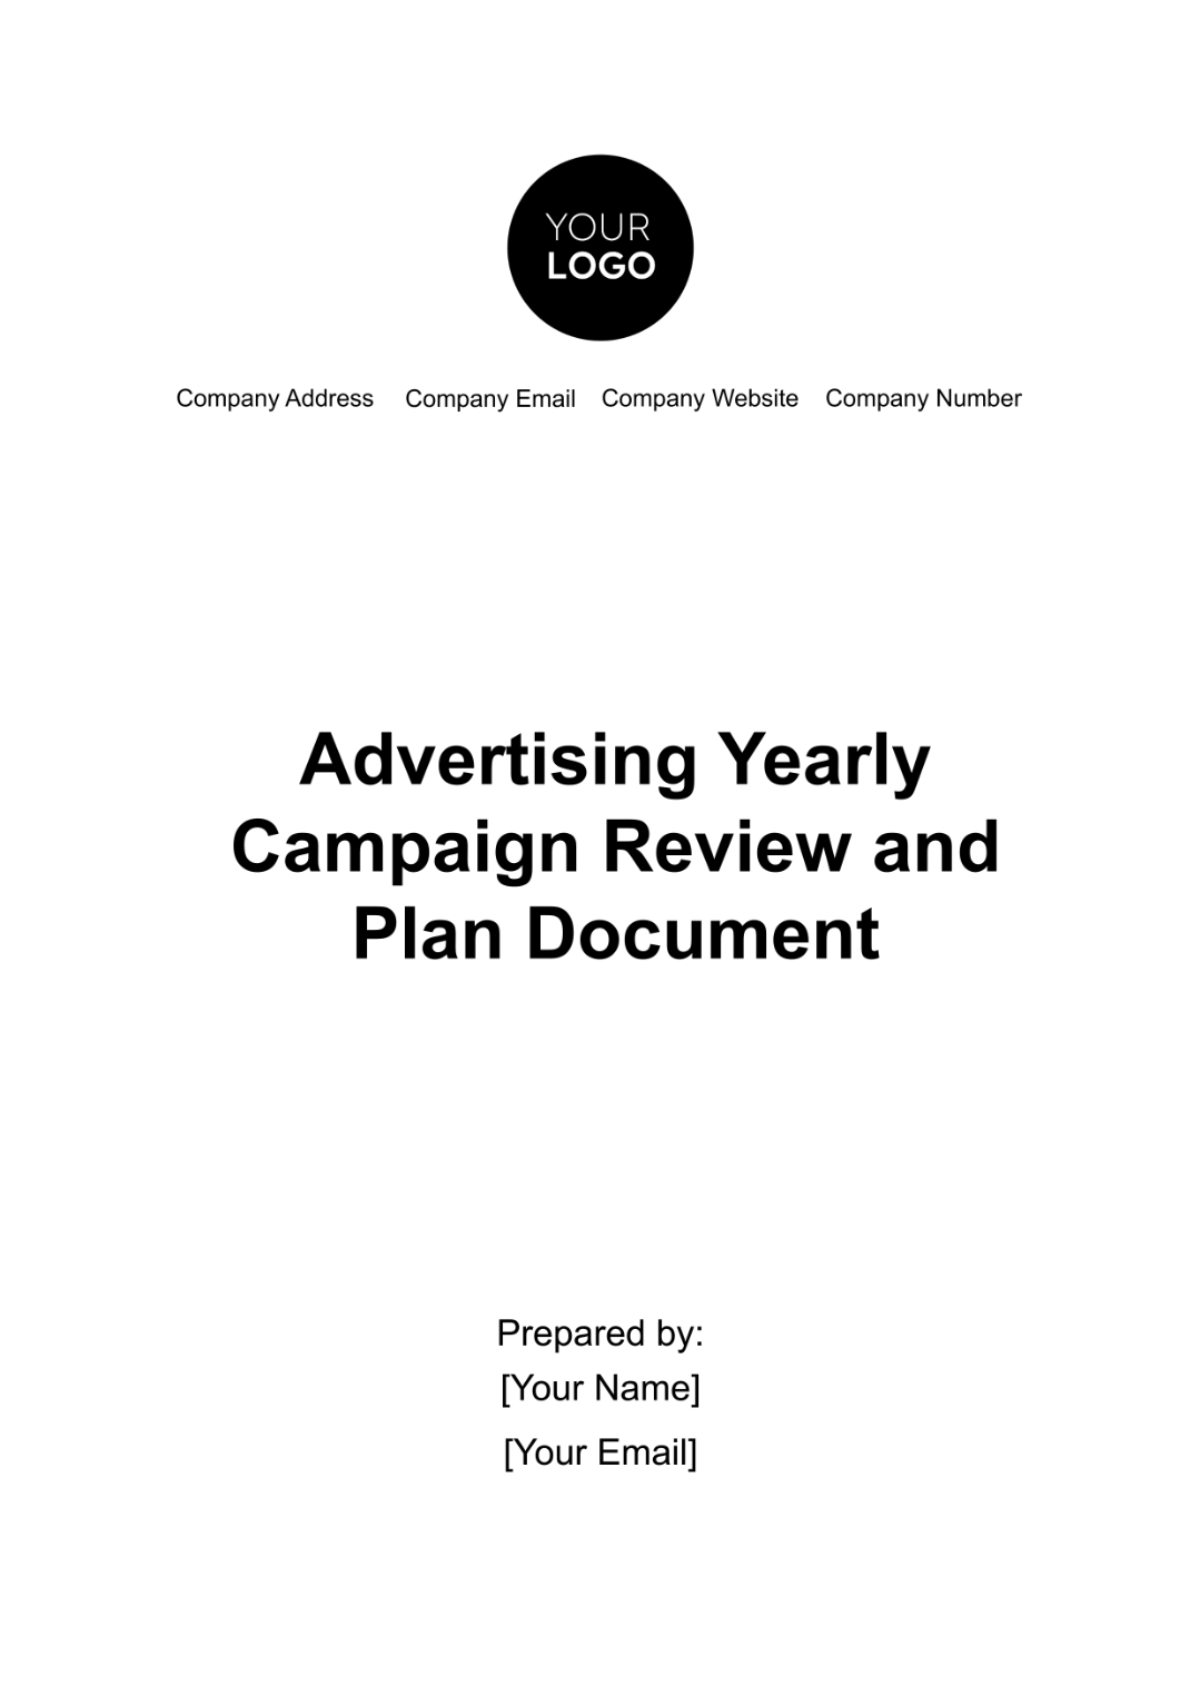 Free Advertising Yearly Campaign Review and Plan Document Template